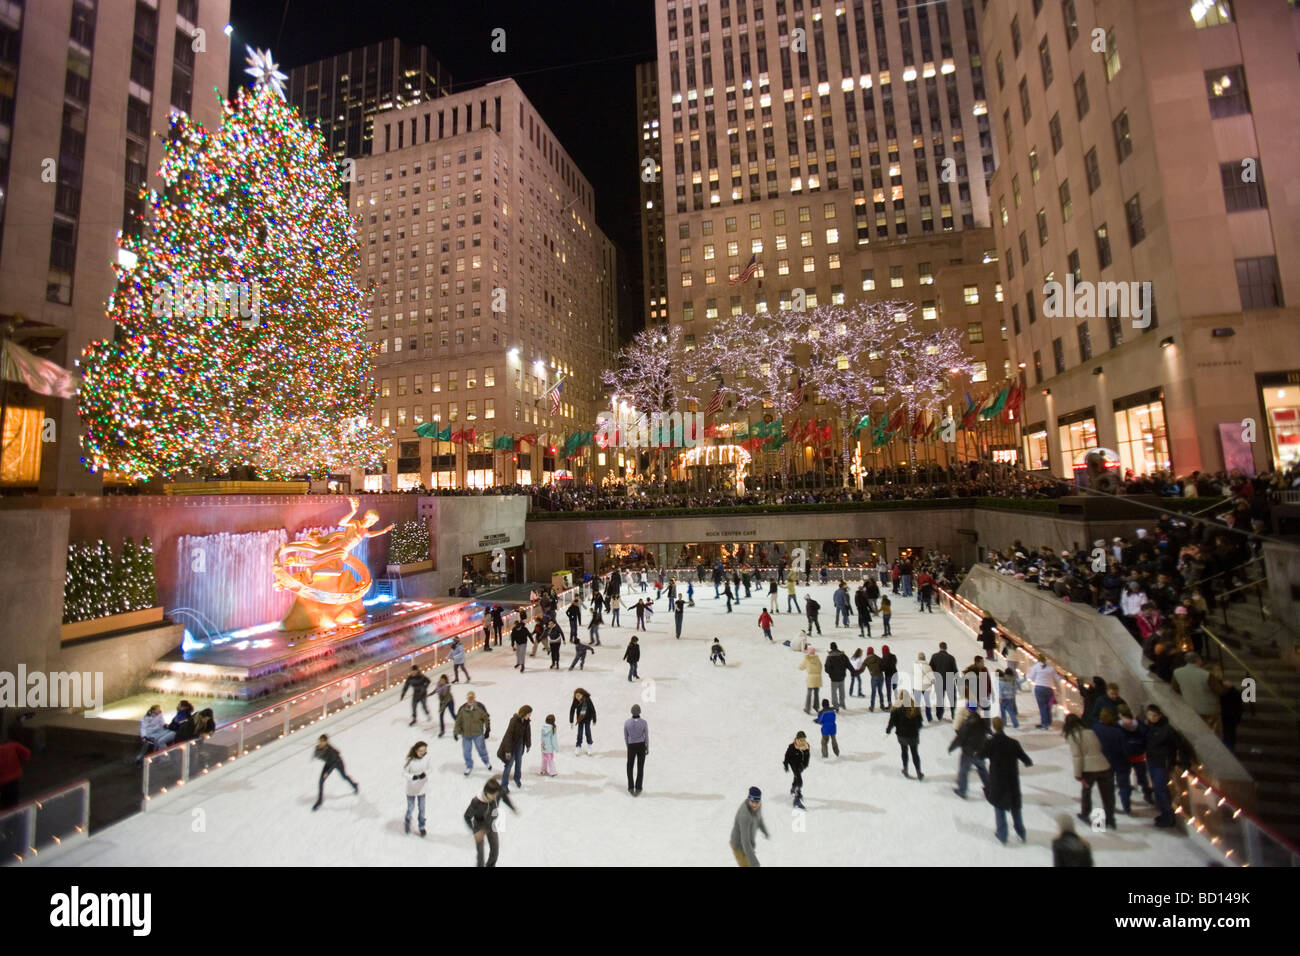 Ice Skaters at Ice skating rink at the Christmas Tree at Rockefeller Stock Photo: 25226255 - Alamy